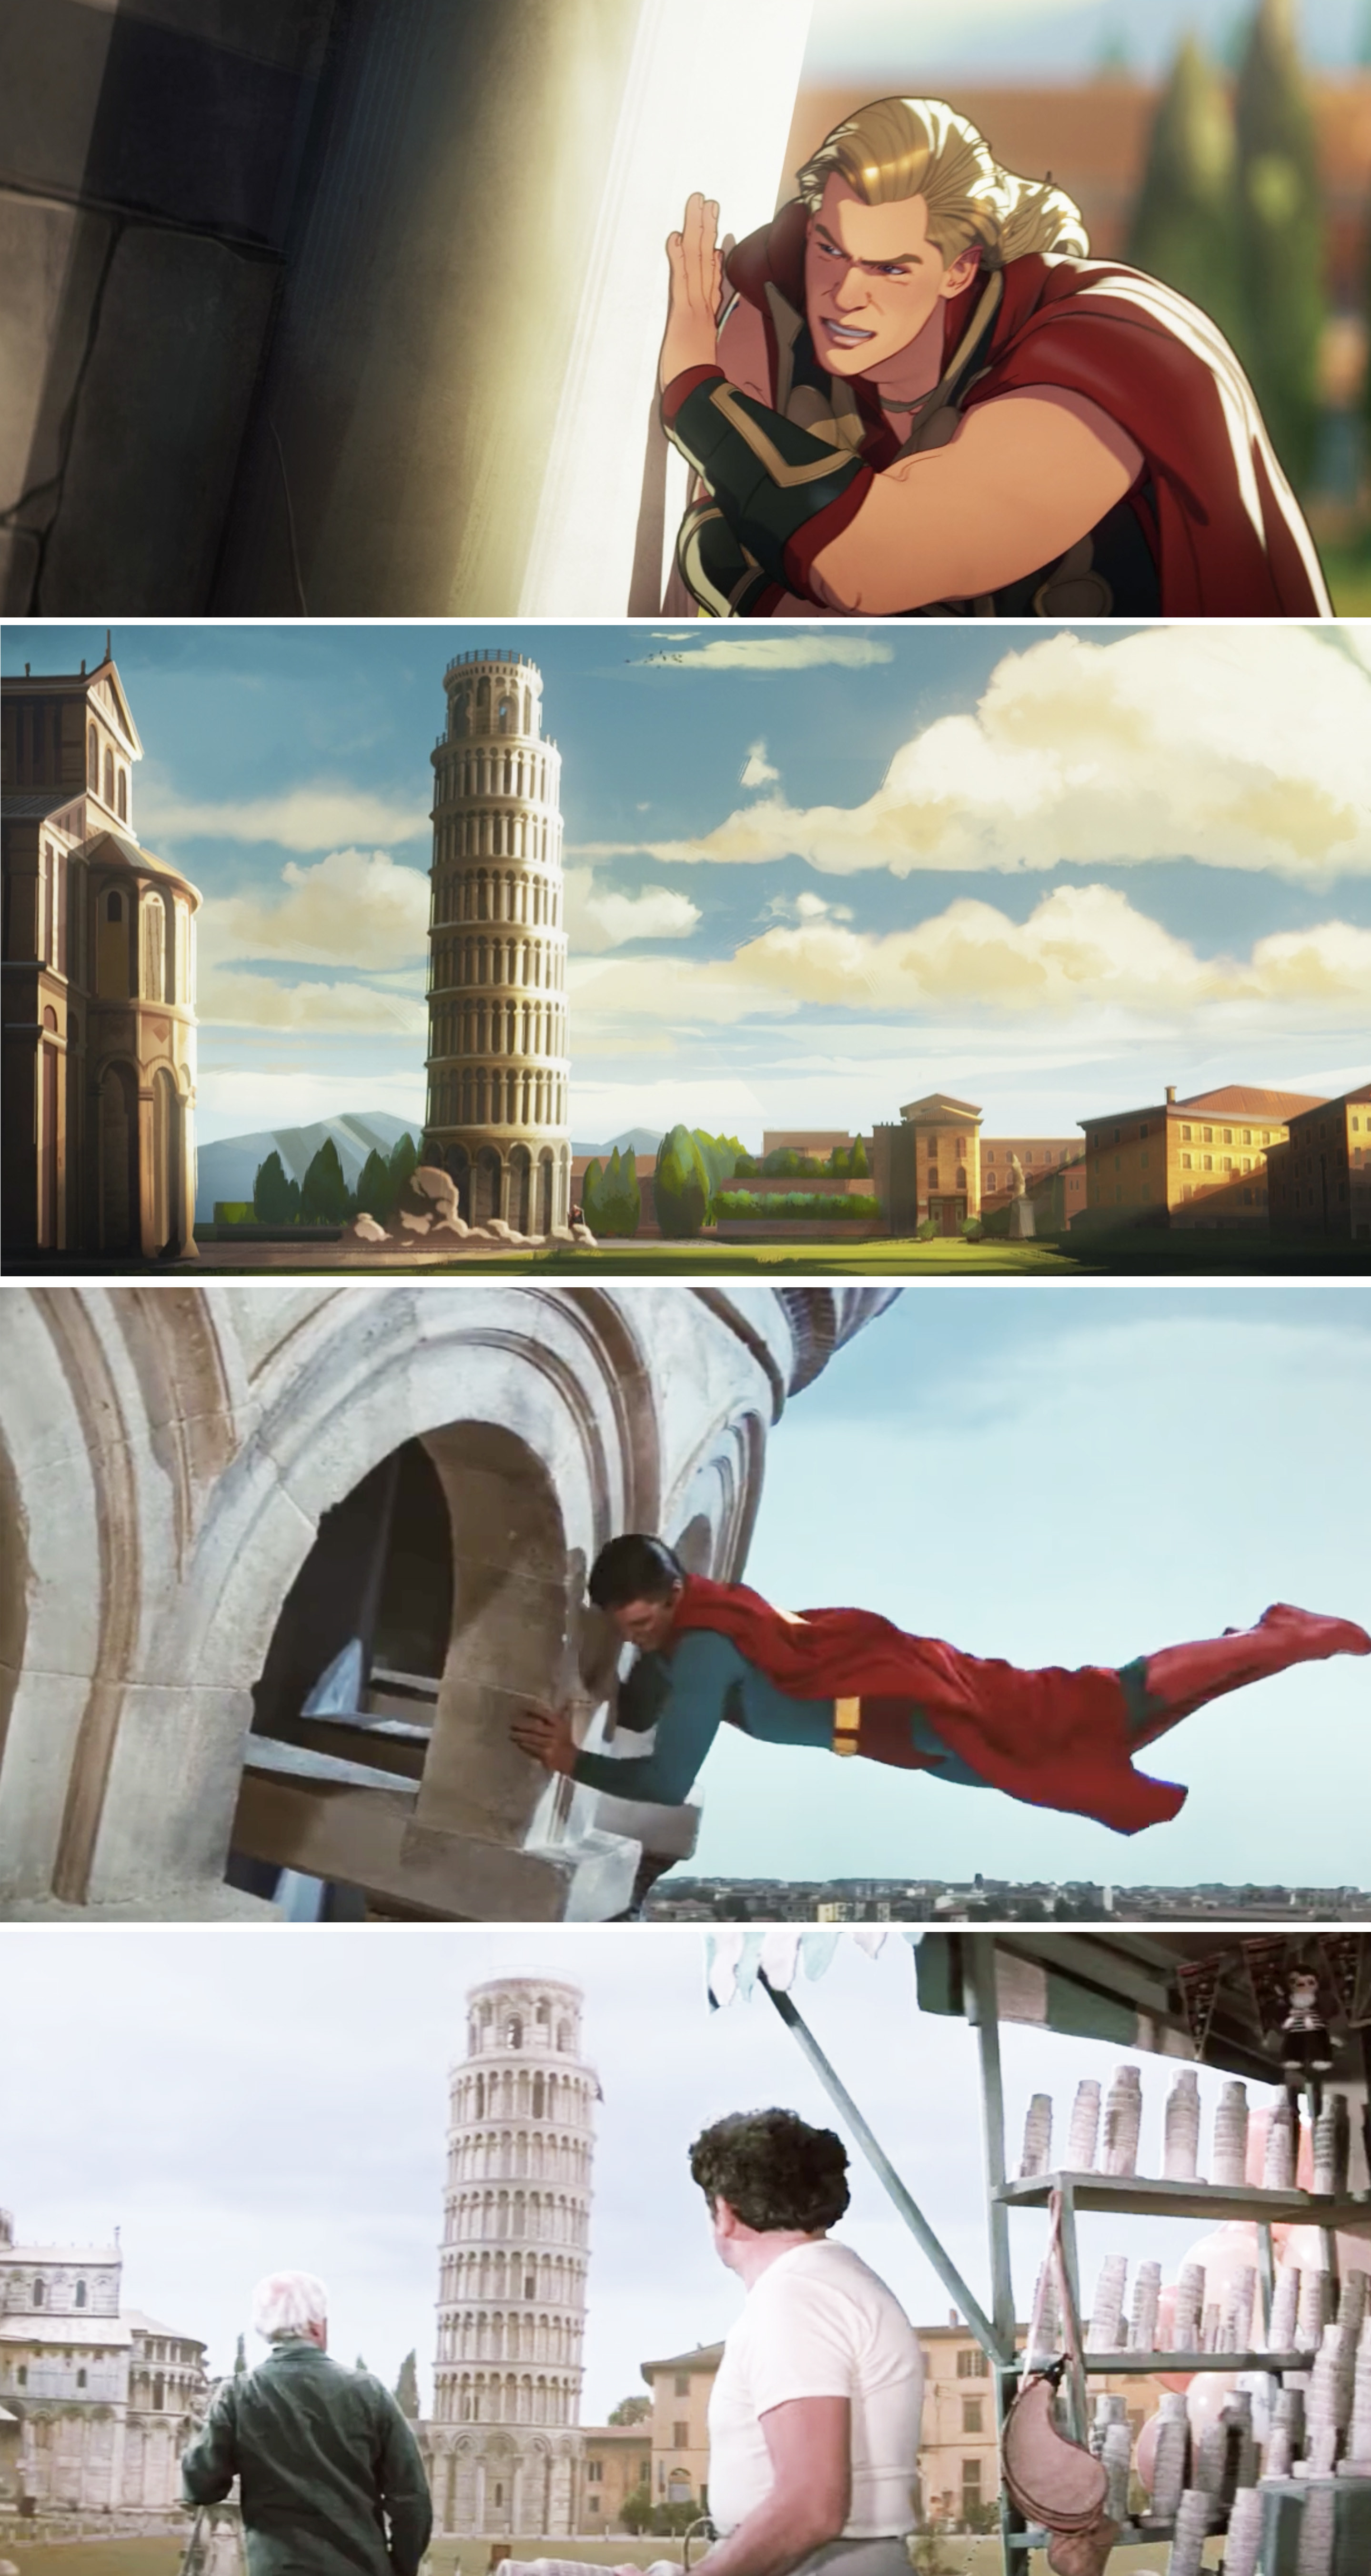 Thor pushing the Leaning Tower of Pisa vs Superman doing the same